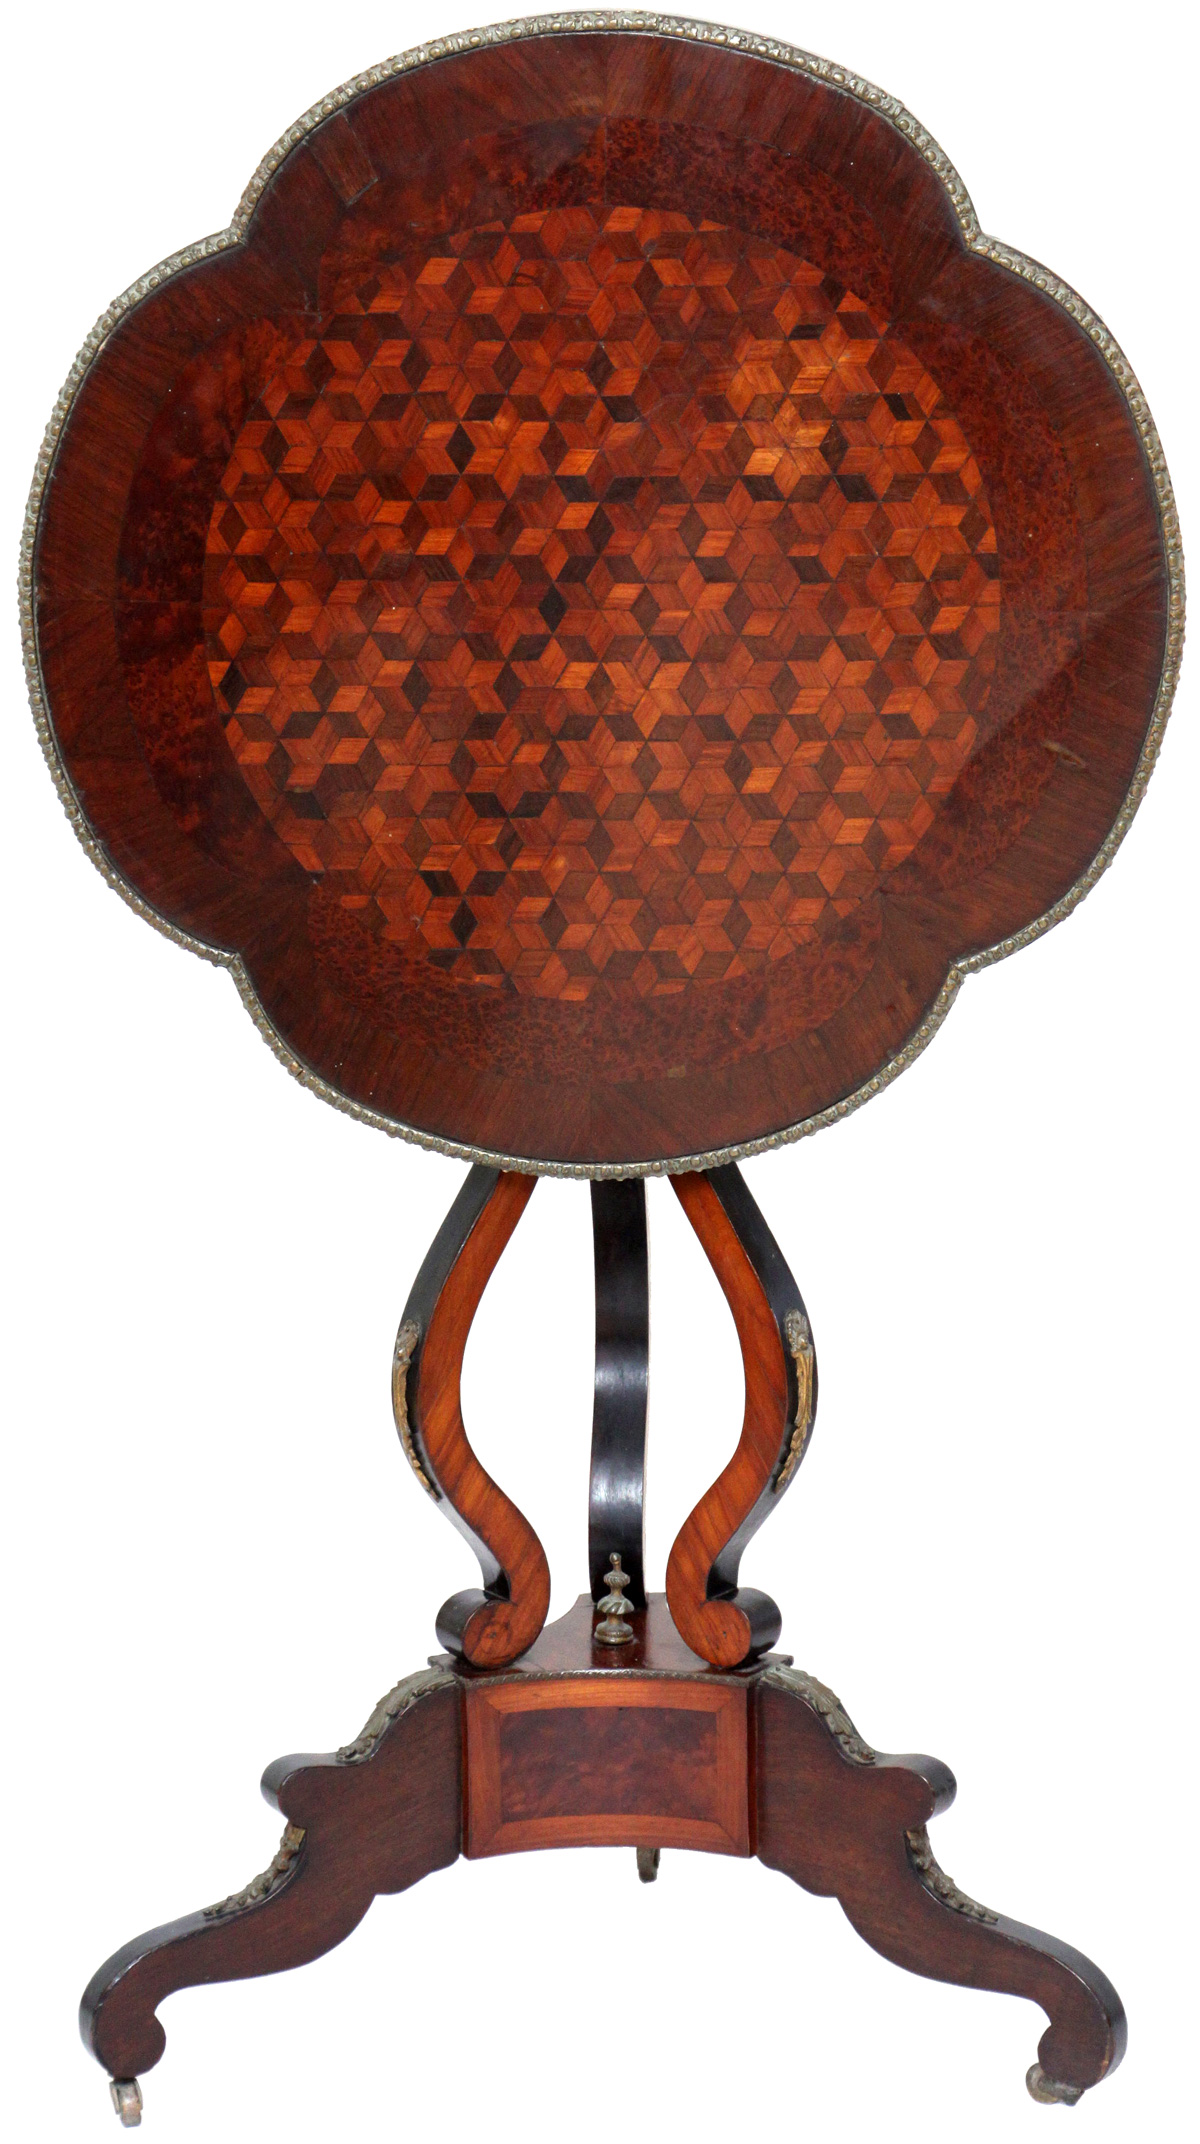 Antique Tilt-Top Tea Table with Marquetry Tabletop - שולחן תה מתקפל עתיק - Back To List of Antique Furniture